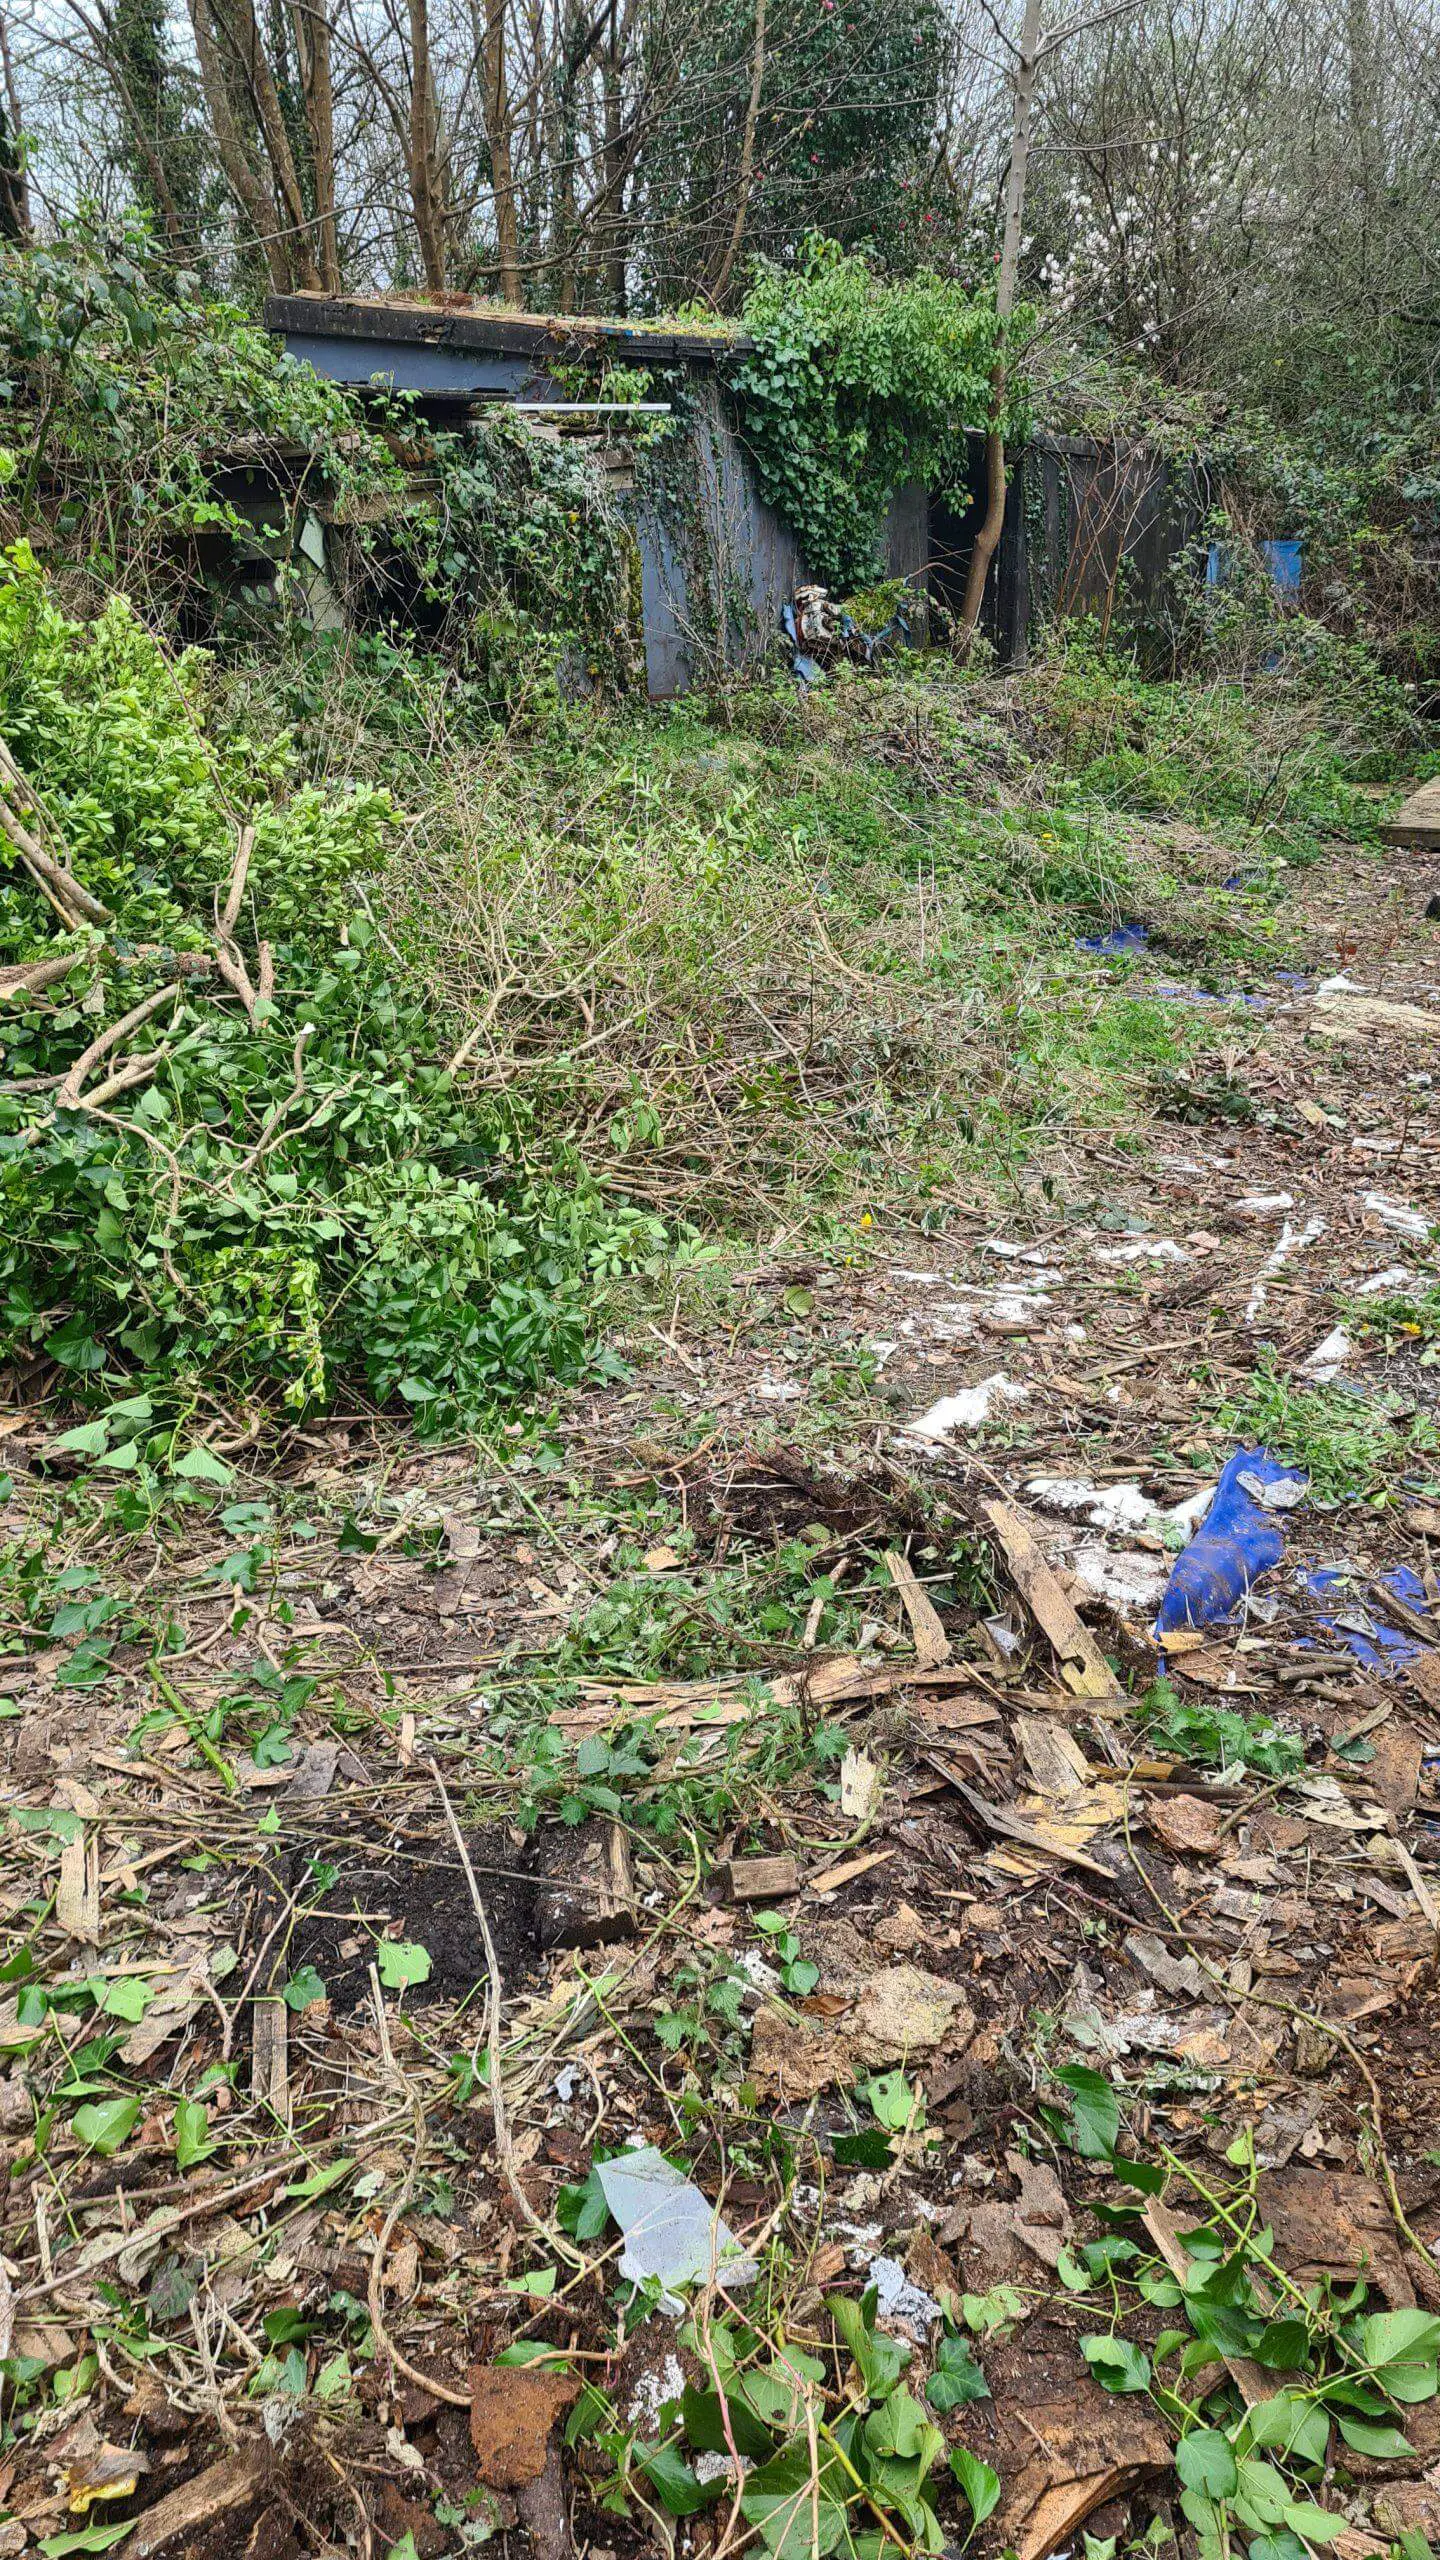 Clearing the site of invasive weeds and creating piles of debris to deal with later on gives you a sense of making progress and gaining back the space